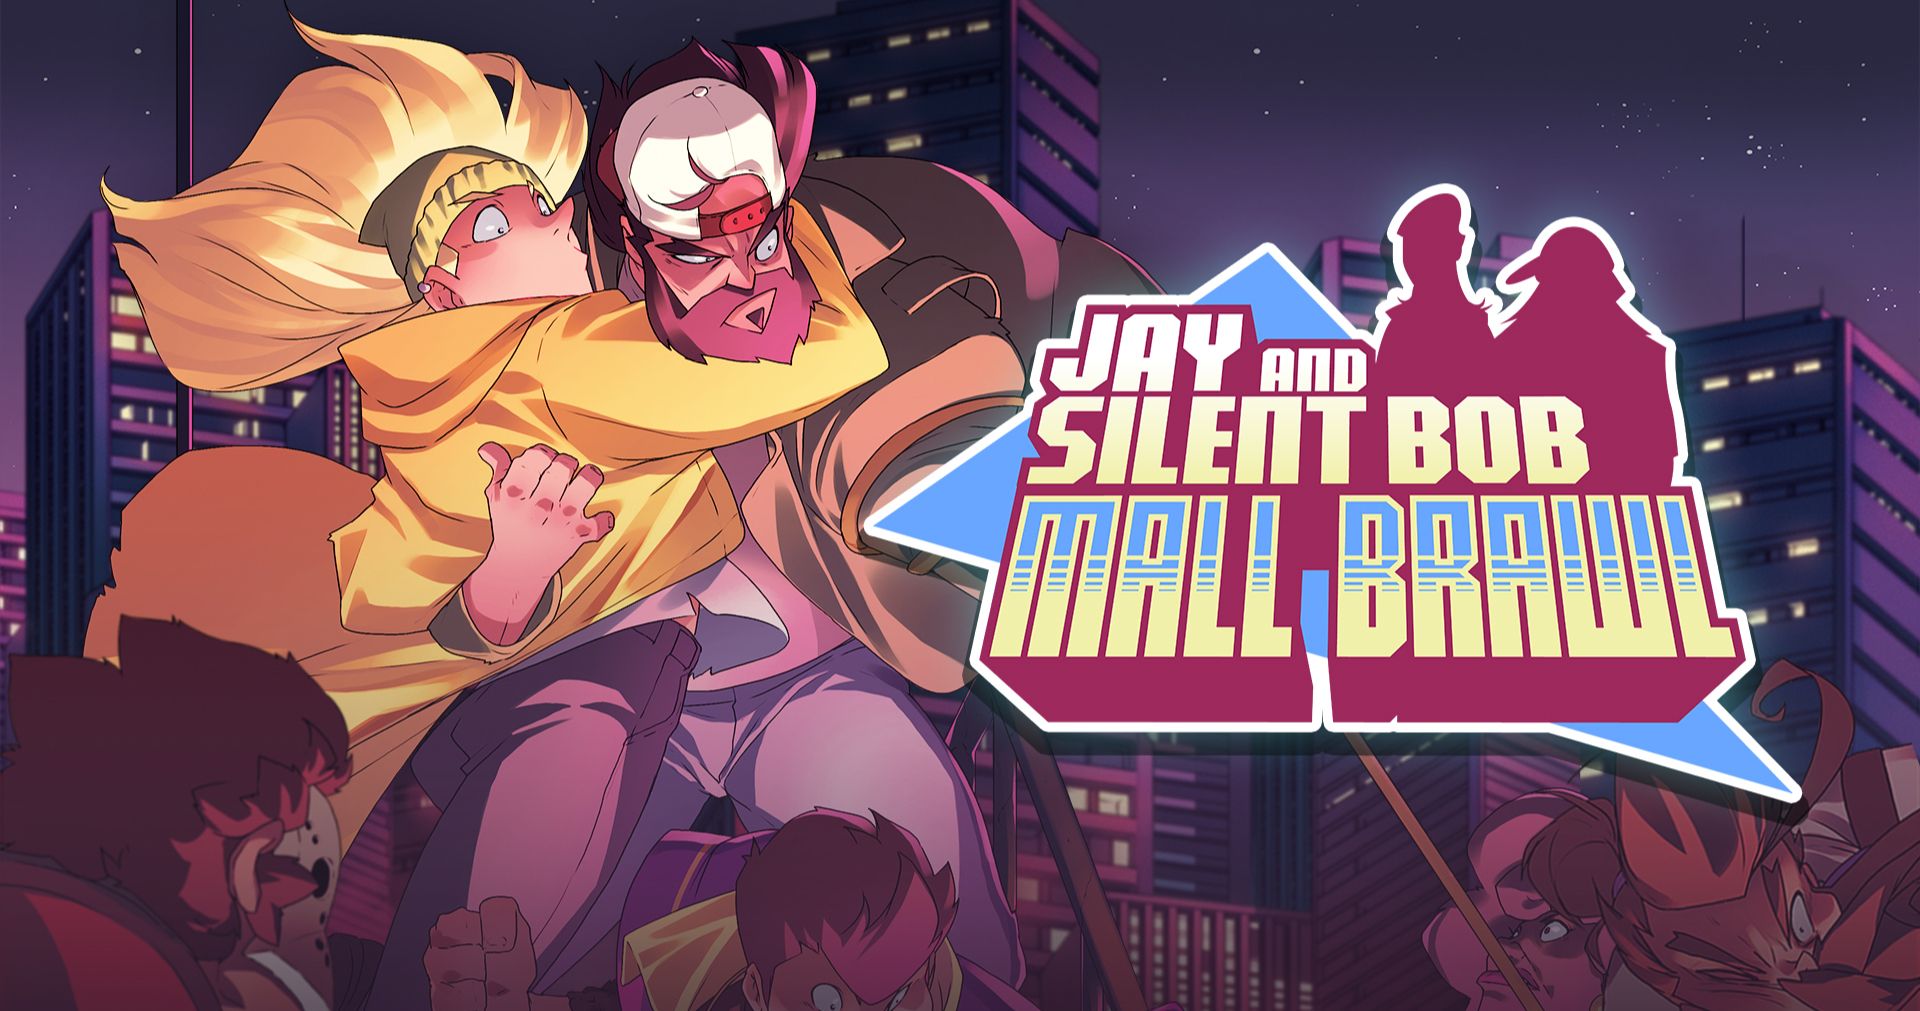 Jay and Silent Bob: Mall Brawl Video Game Is Coming to Nintendo Switch Next Week